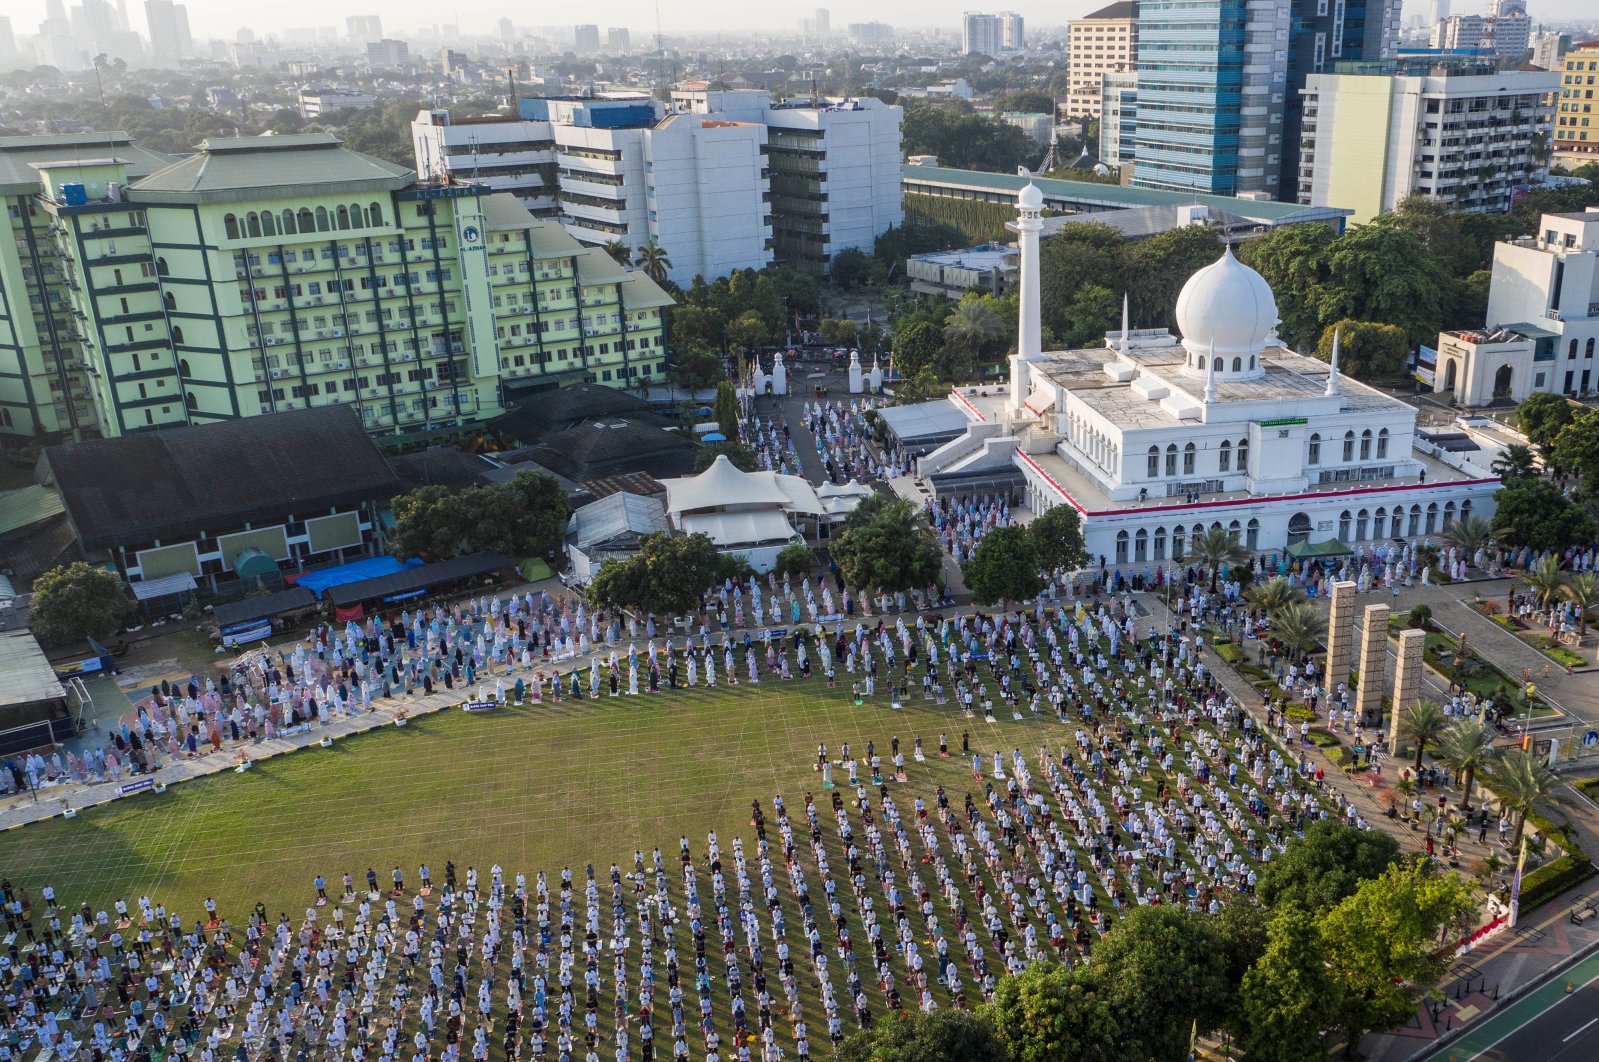 An aerial picture of Indonesian Muslims offering Eid al-Adha prayers at the Great Mosque of Al-Azhar, during the outbreak of the coronavirus disease (COVID-19) in Jakarta, Indonesia, July 31, 2020. (Antara Foto via Reuters)